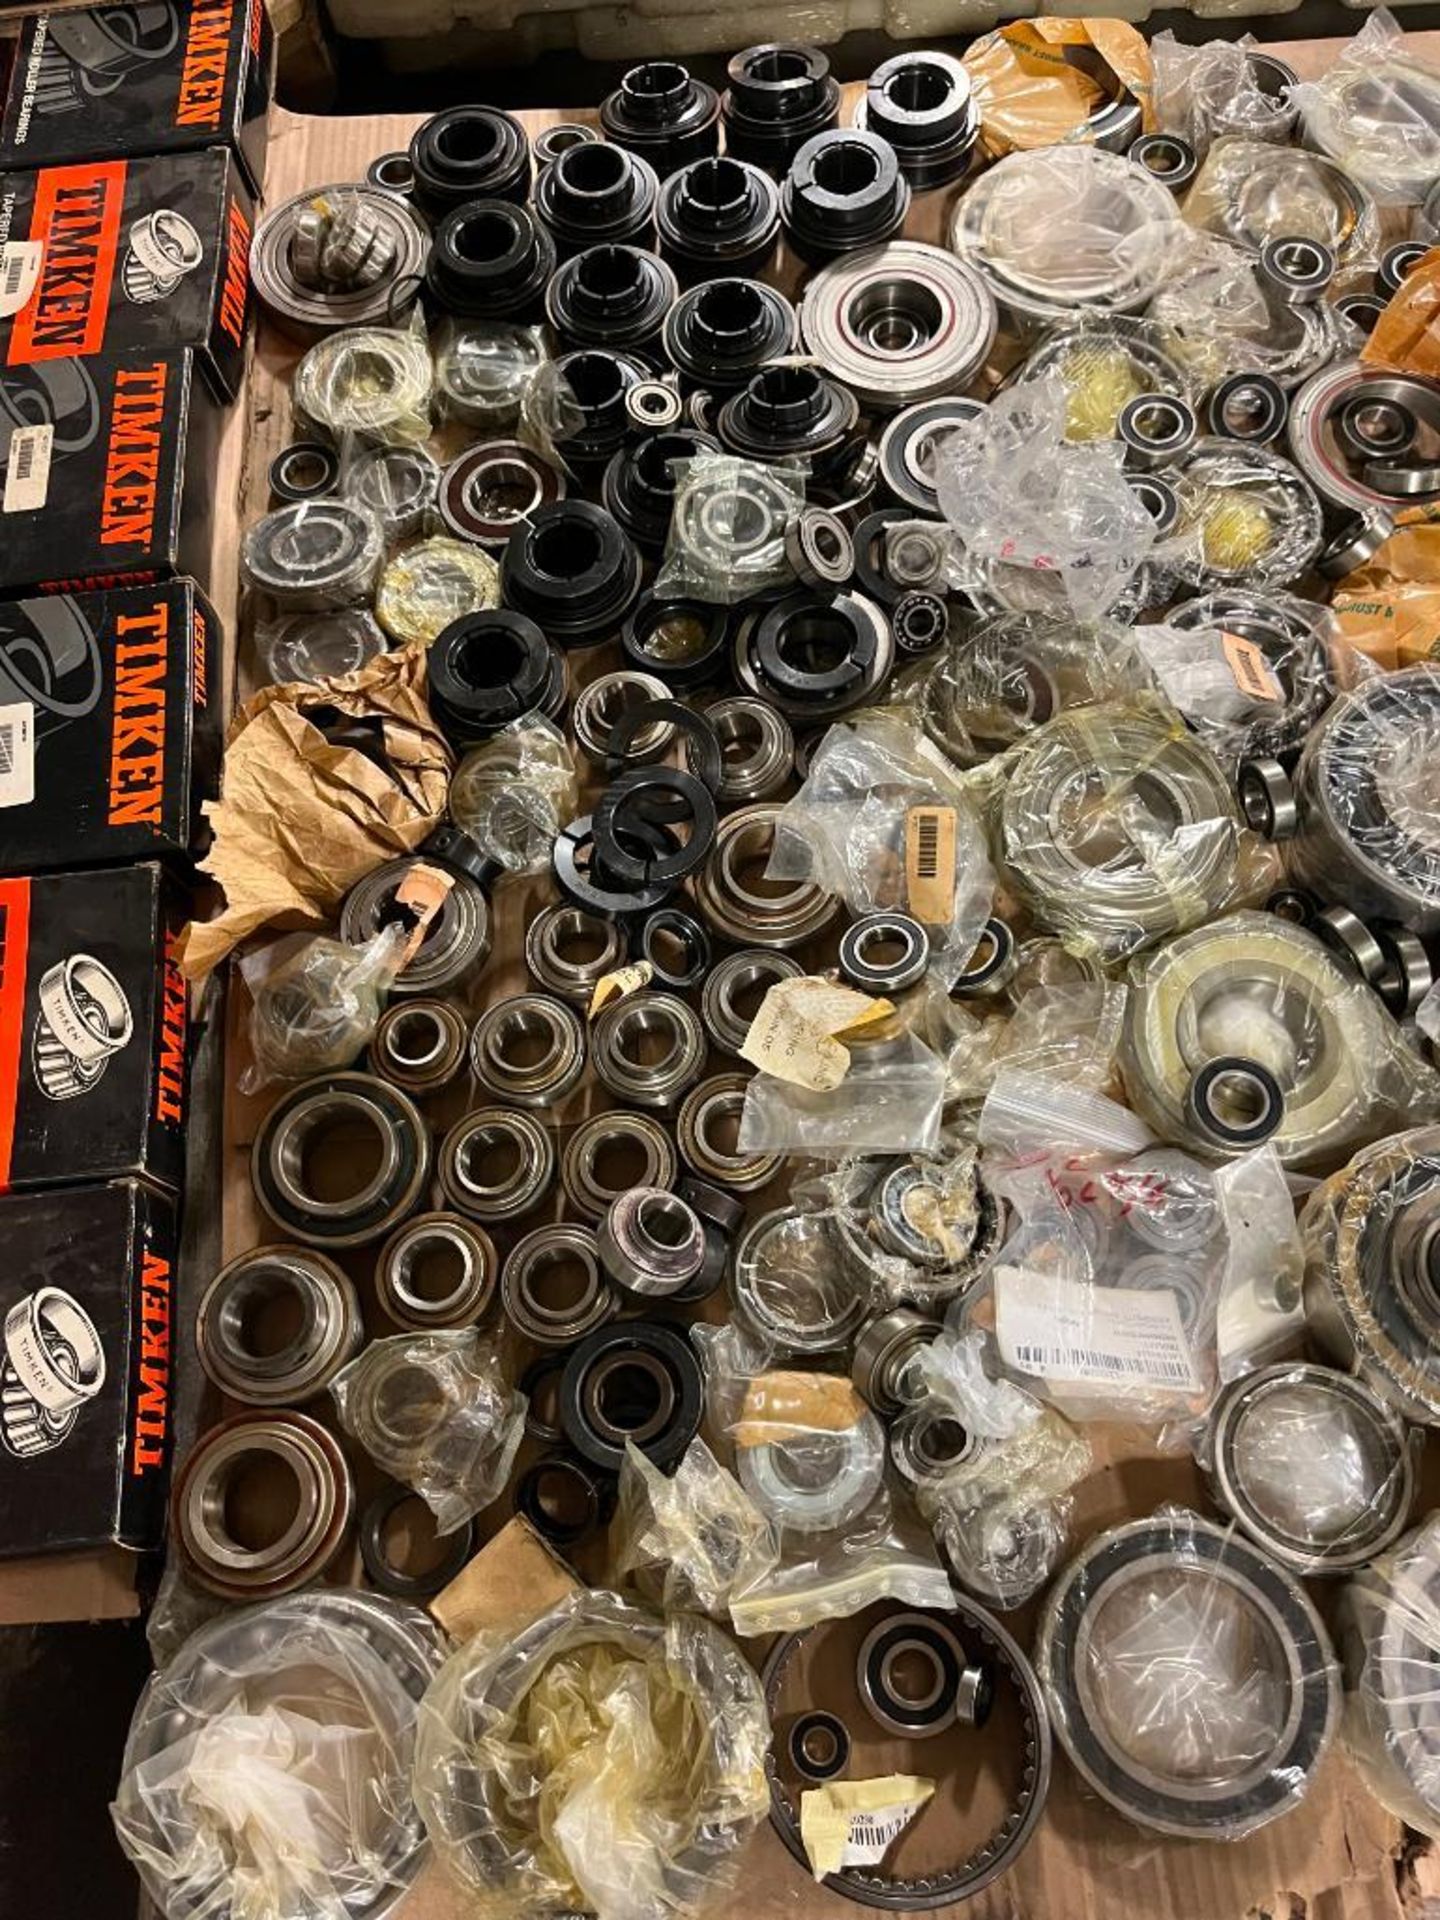 Skid Consisting of Assorted Bearings - Image 2 of 5